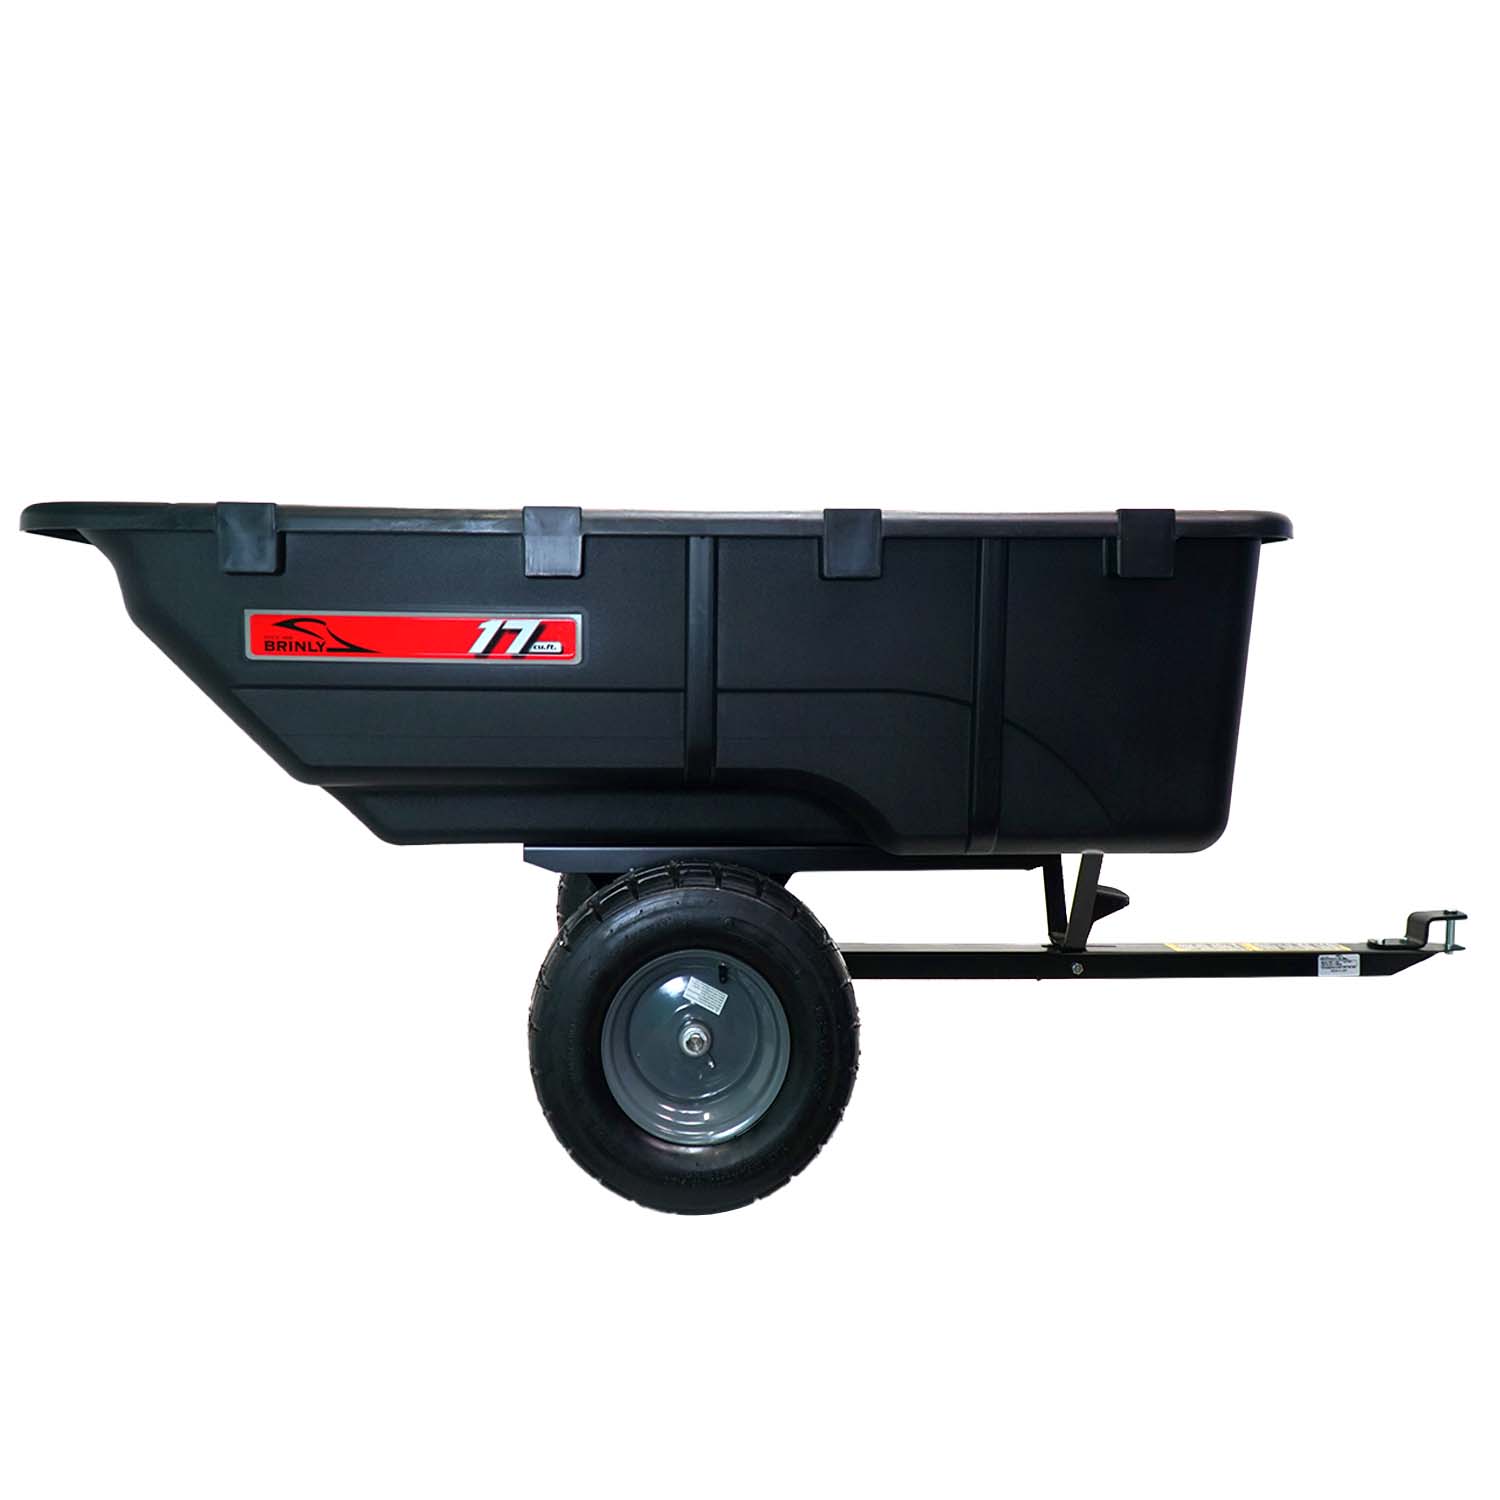 Brinly-Hardy Utility Cart Tow-Behind Poly Steep Dump Angle Plastic Bed/Tray 